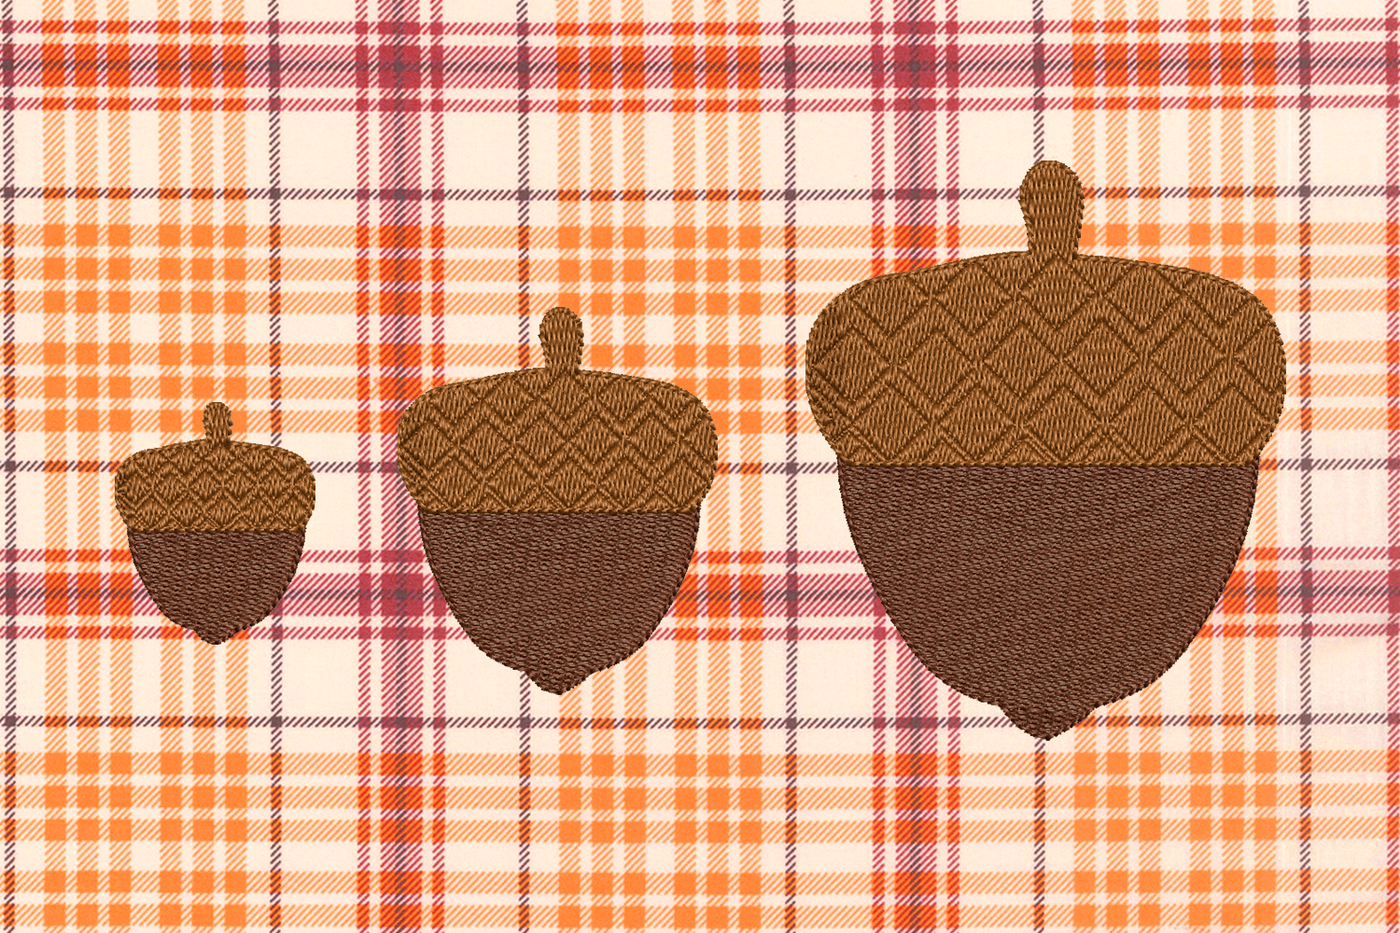 Three embroidered acorns of various sizes on a plaid background in fall colors. The acorn caps have a waffled embroidery texture.